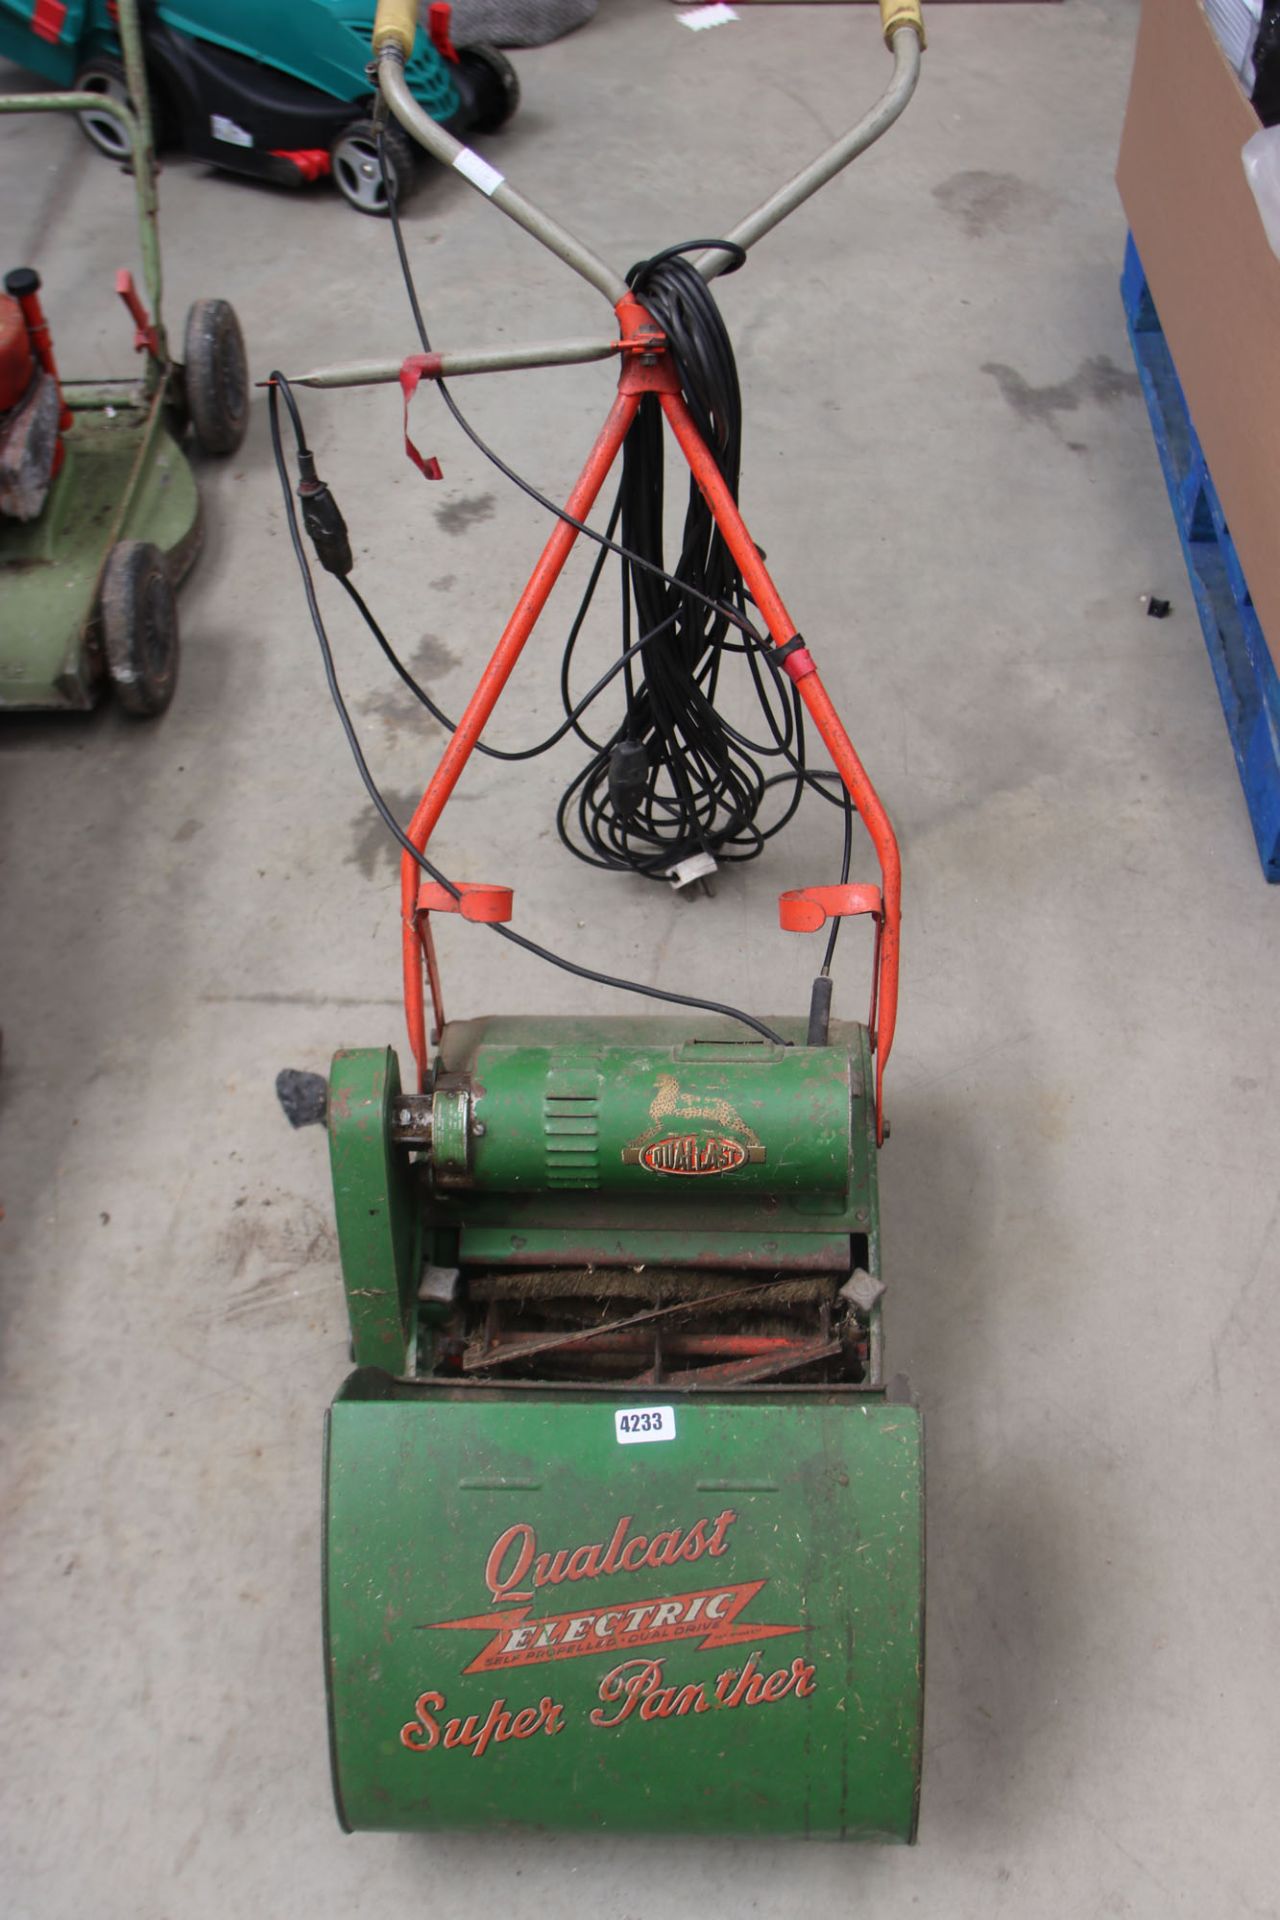 Qualcast electric cylinder mower with grass box